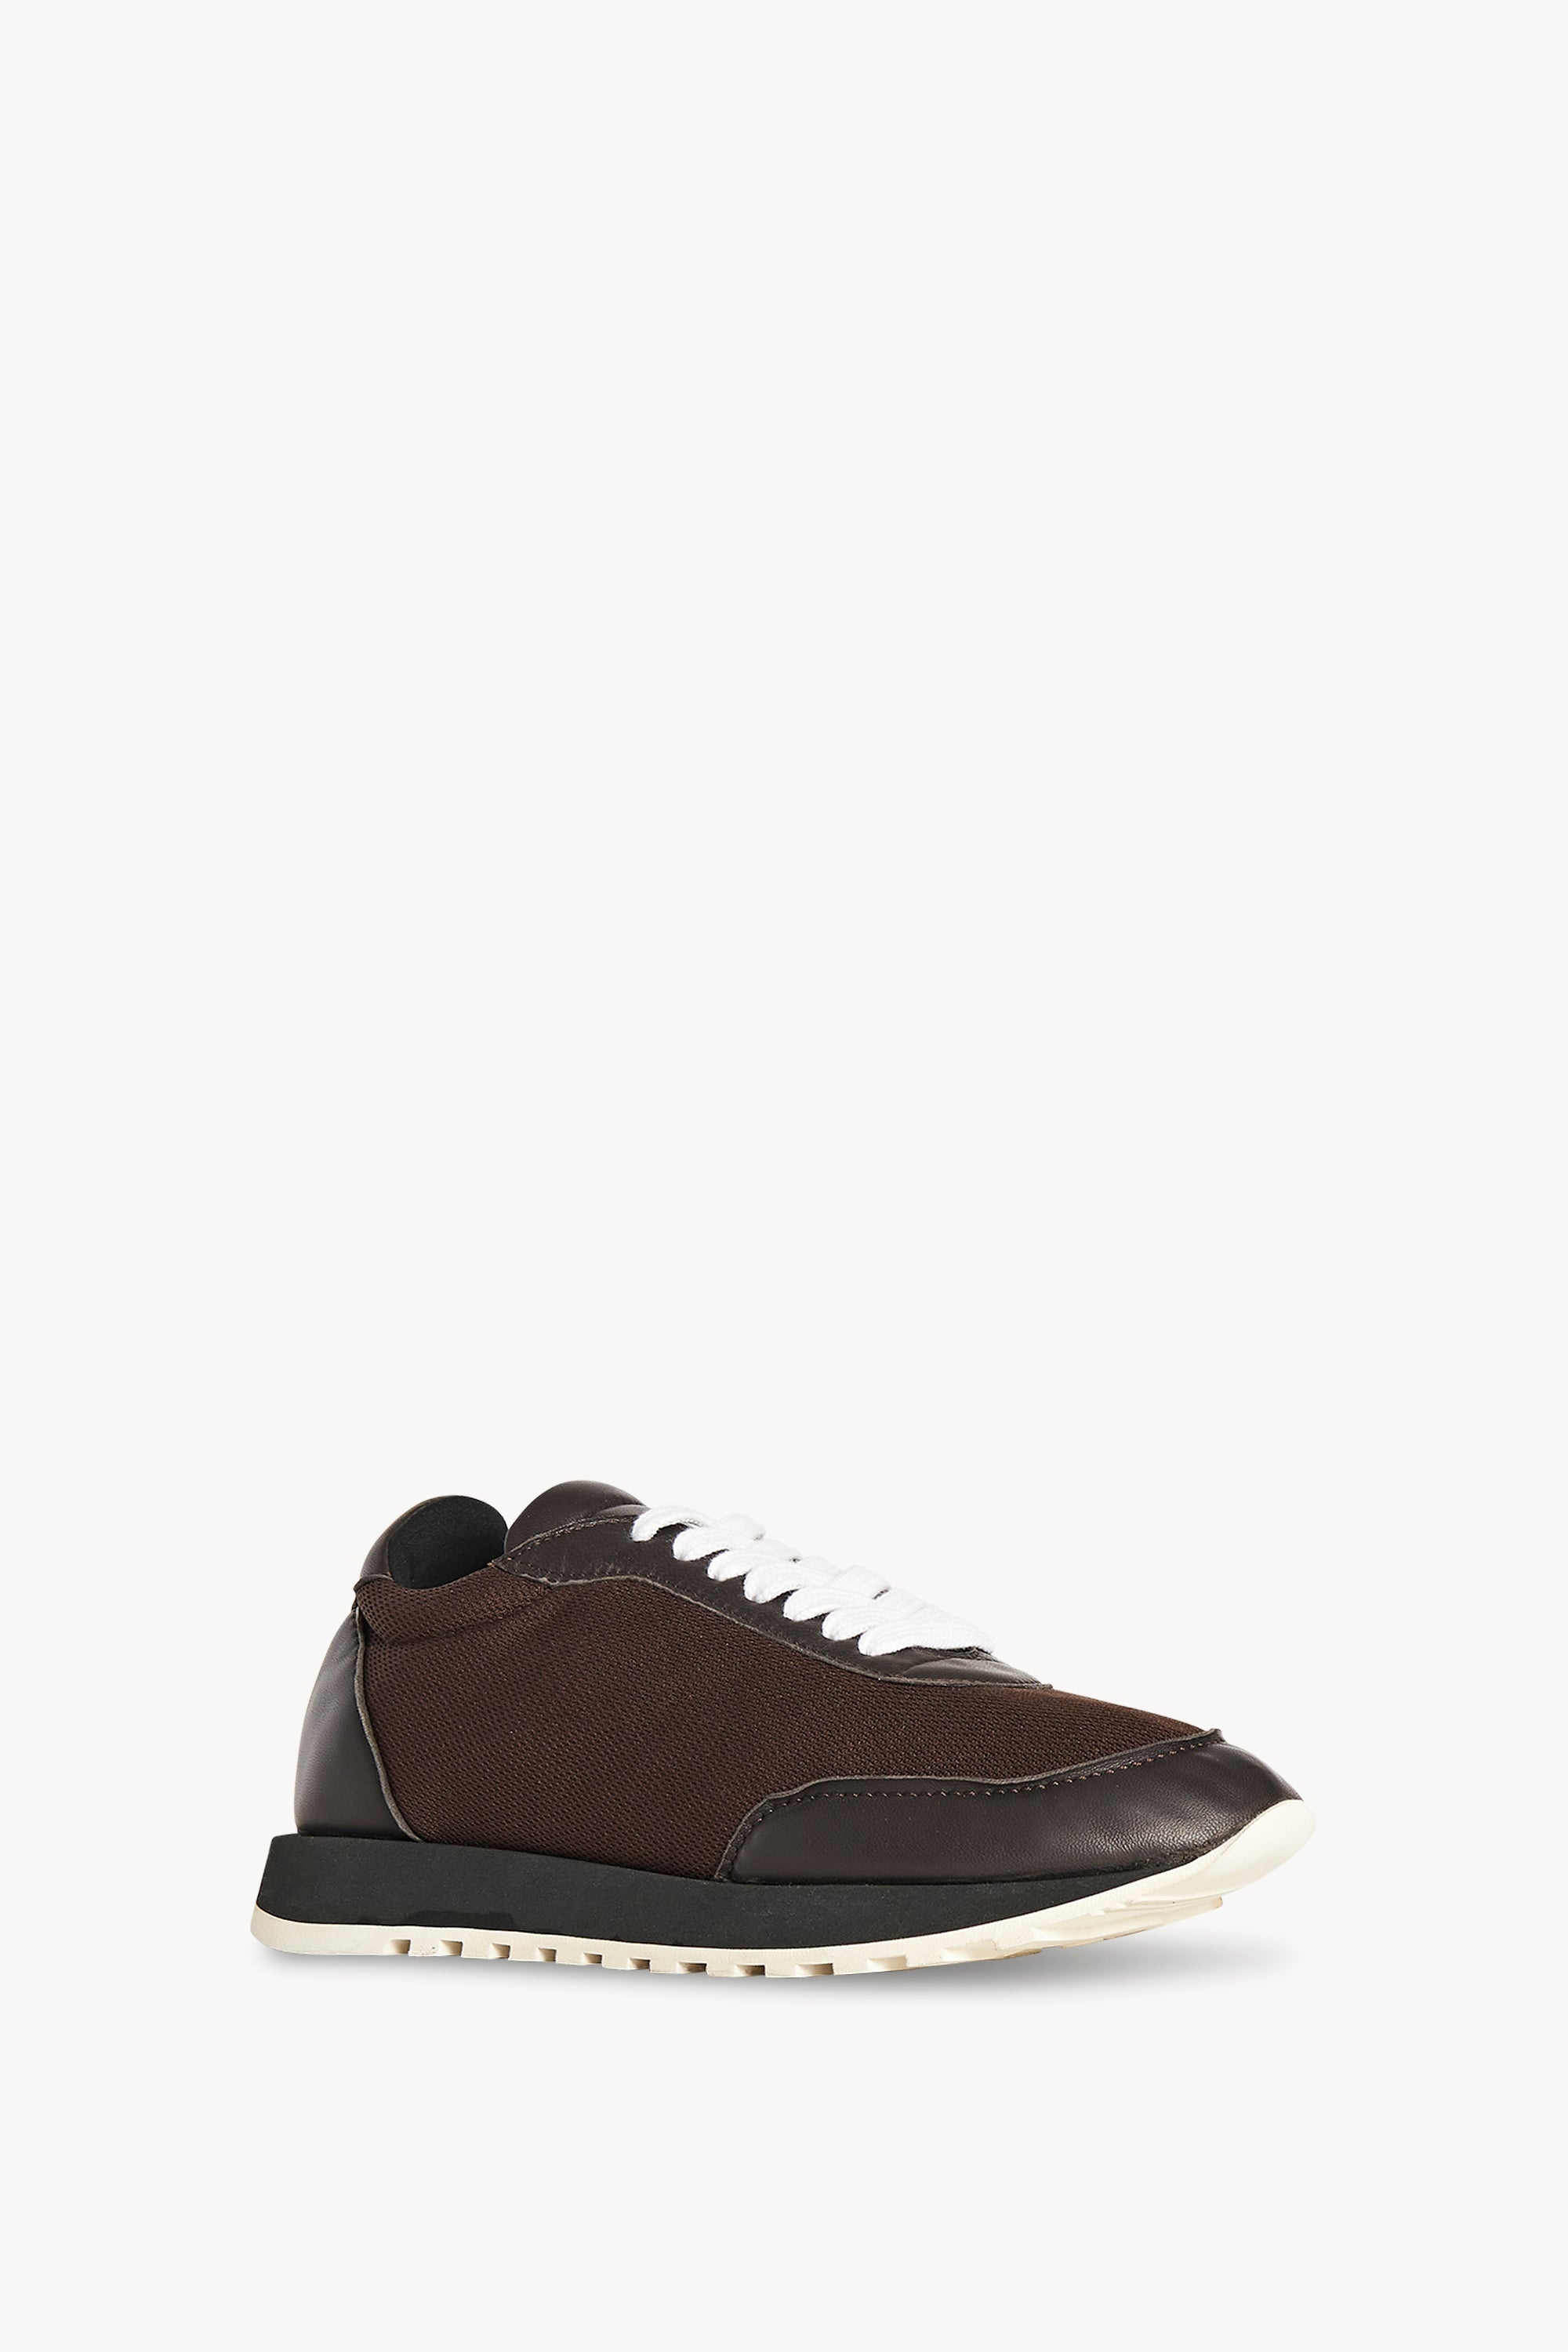 Owen Runner in Leather and Mesh - 2